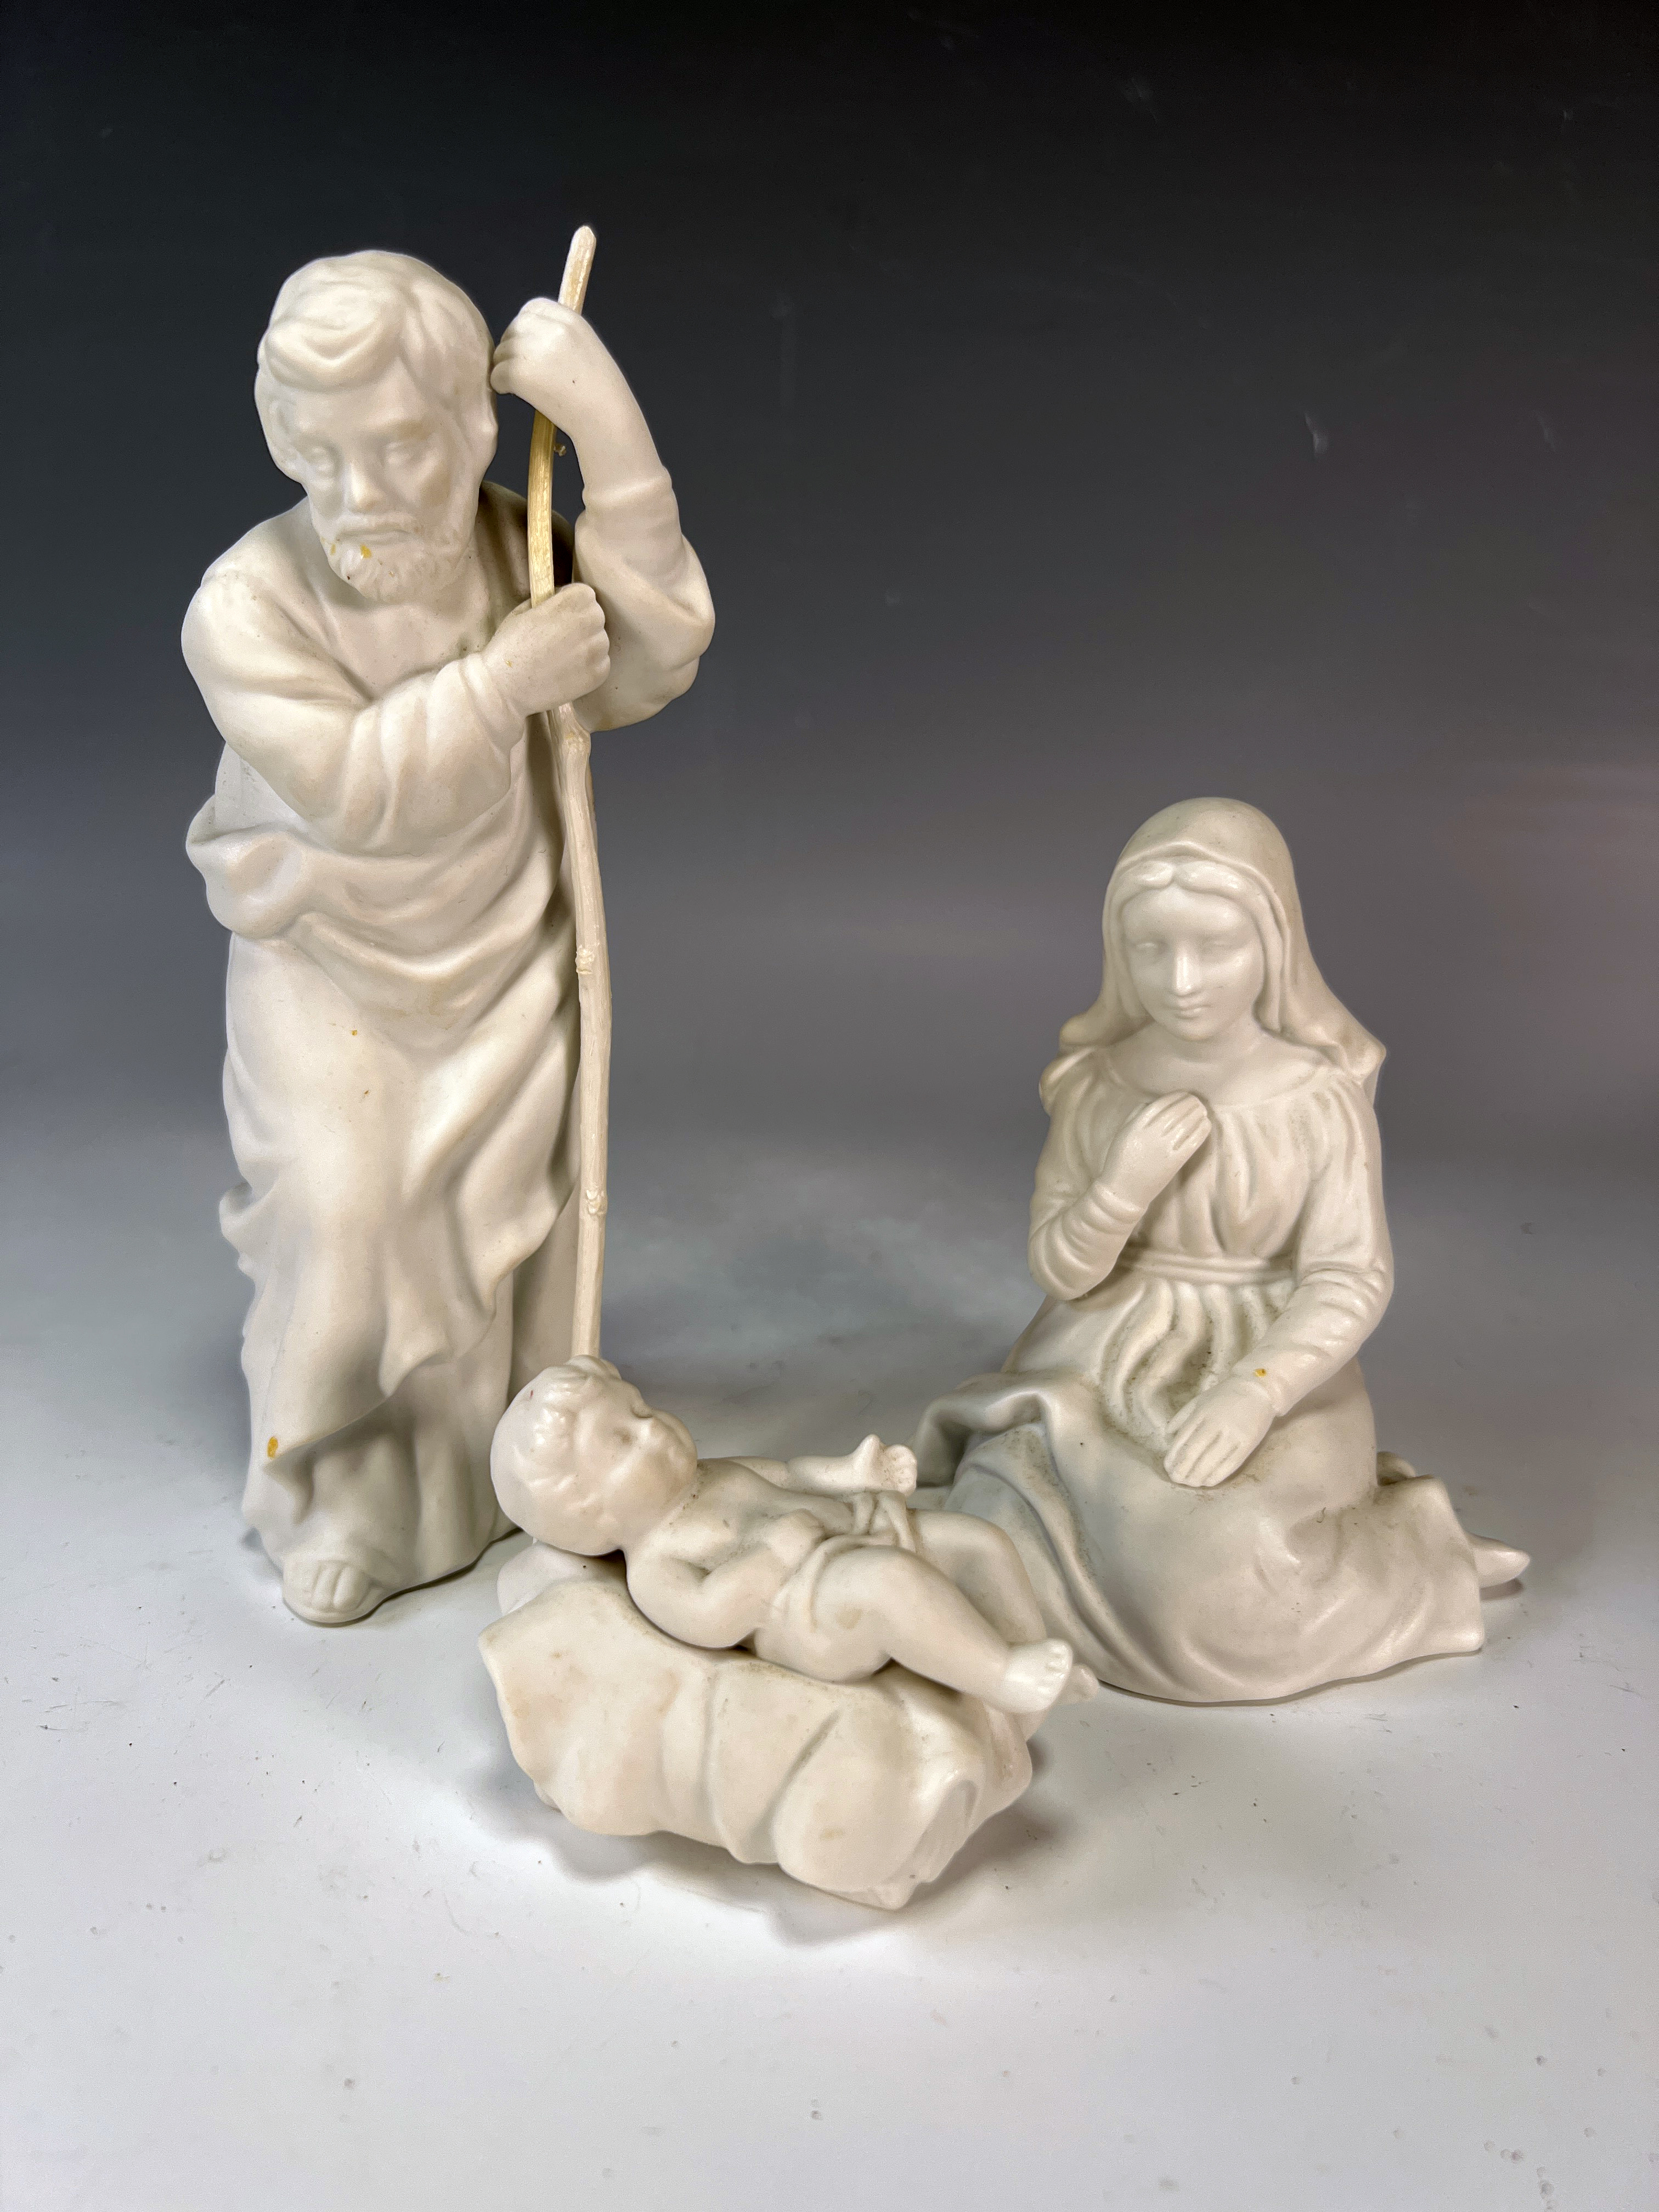 Avon Nativity Collectibles Holy Family Porcelain Figures In Box image 2